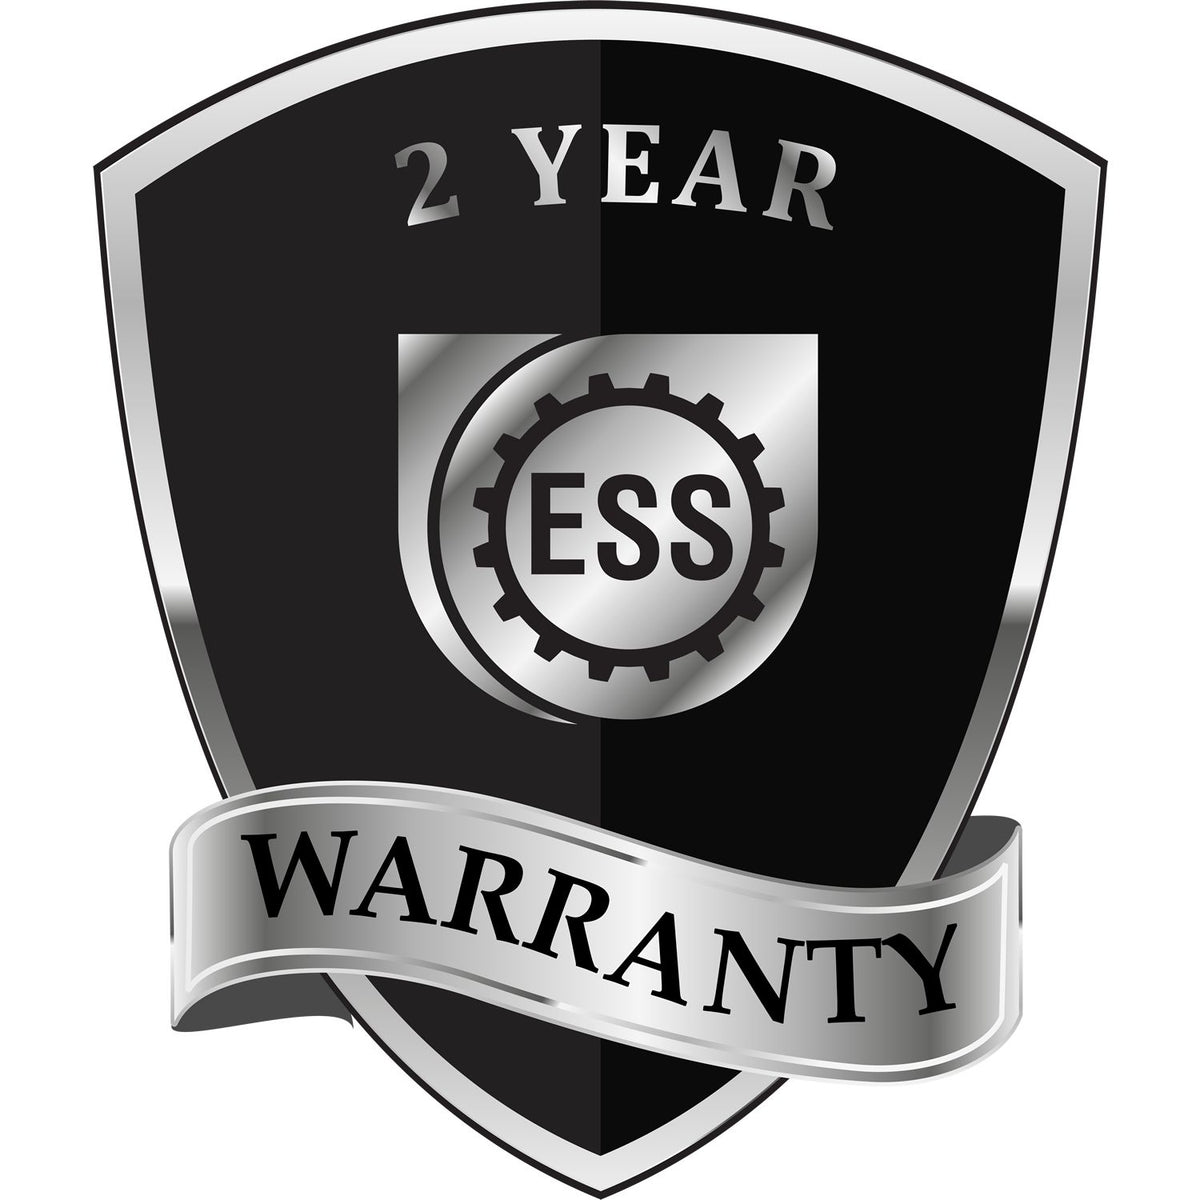 A black and silver badge or emblem showing warranty information for the Gift Arizona Land Surveyor Seal